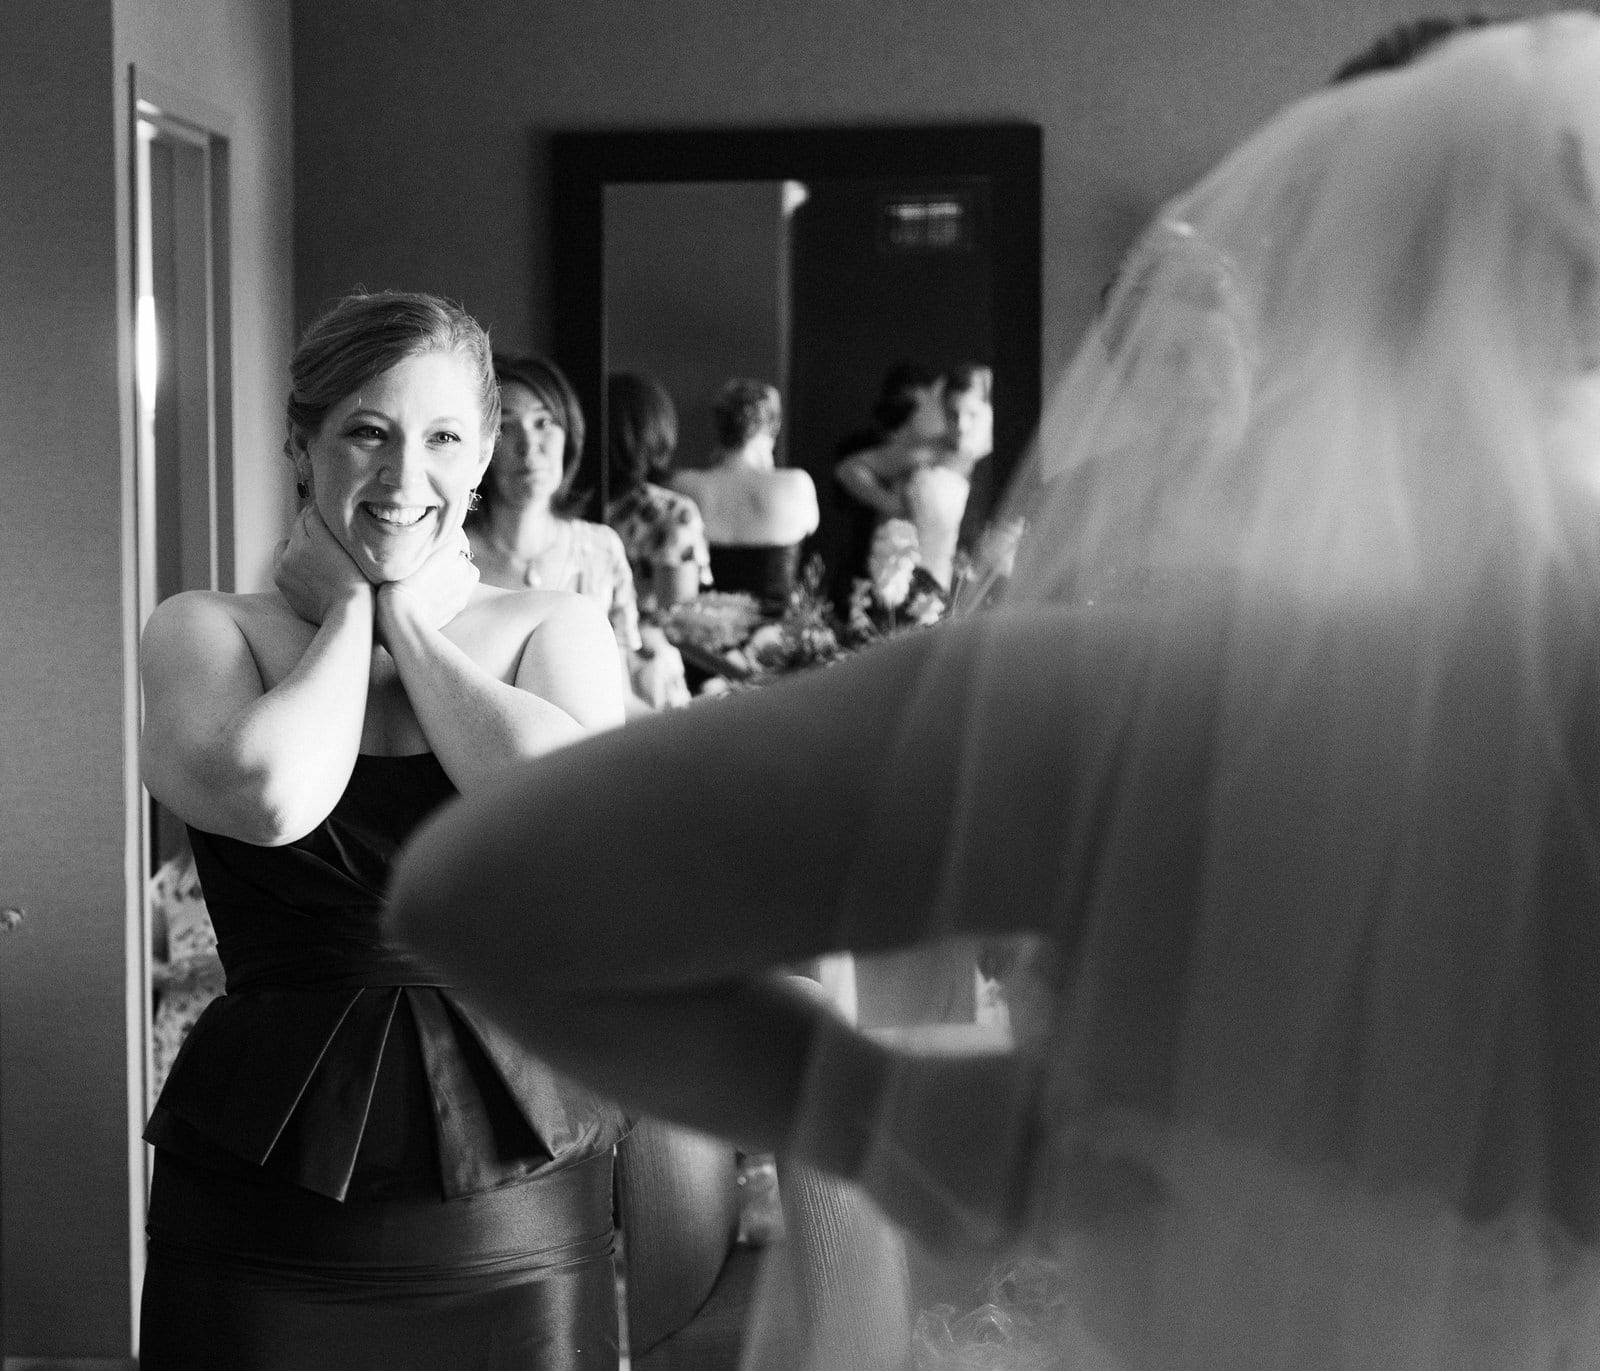 A bridesmaid smiles and holds her hands to her face as she looks at the bride.